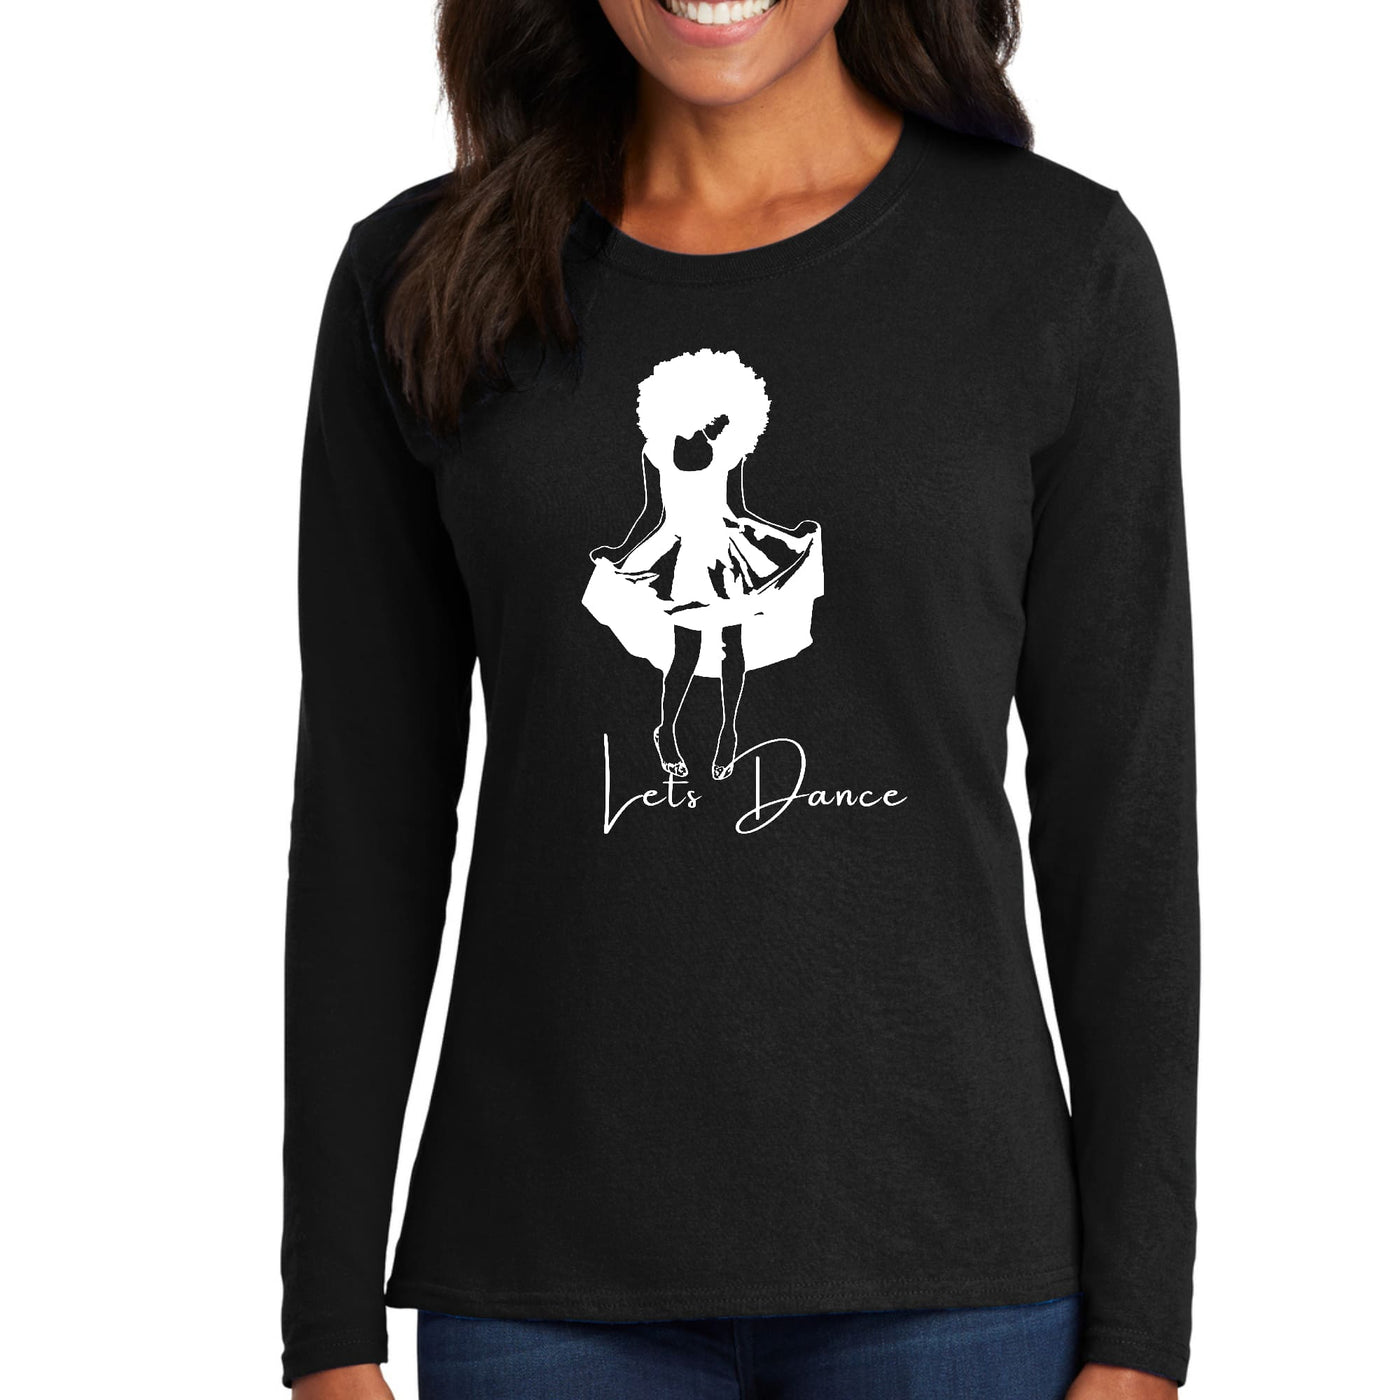 Womens Long Sleeve Graphic T-shirt Say It Soul Lets Dance White - Womens